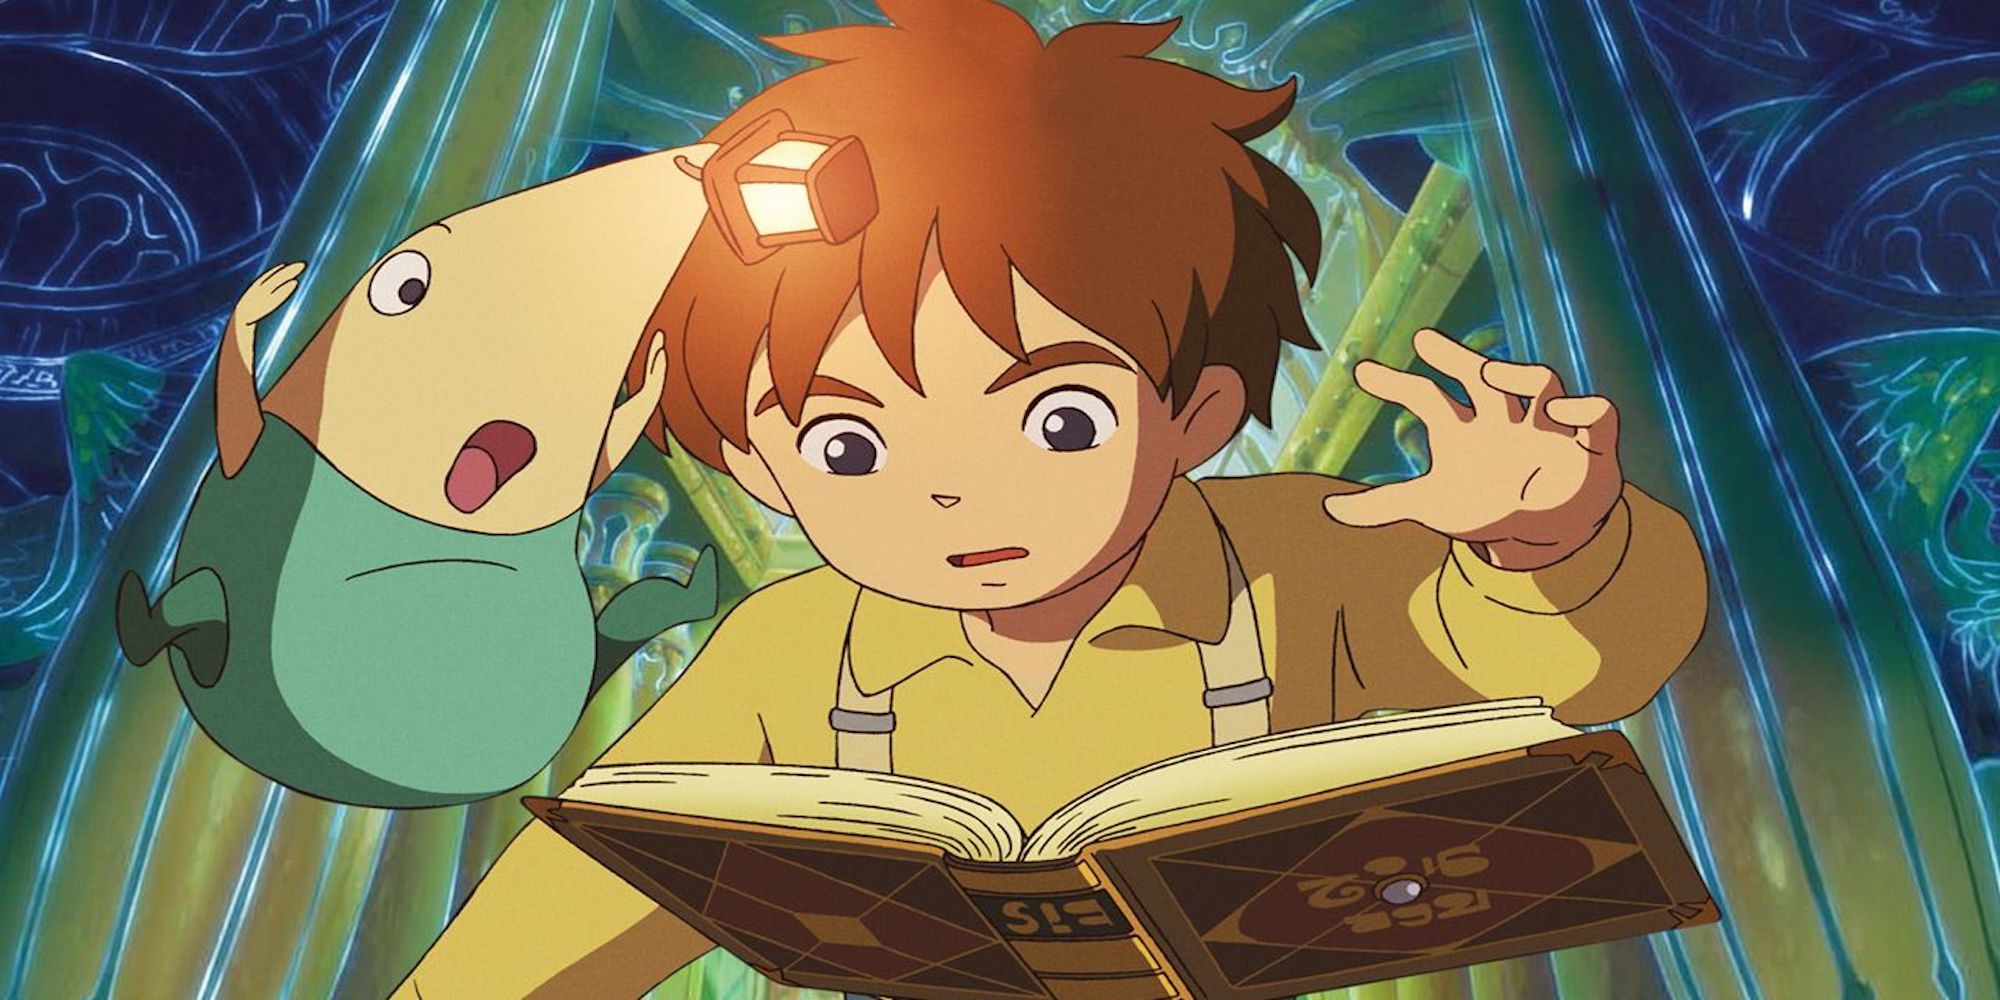 Official artwork from Ni no Kuni: Wrath of the White Witch